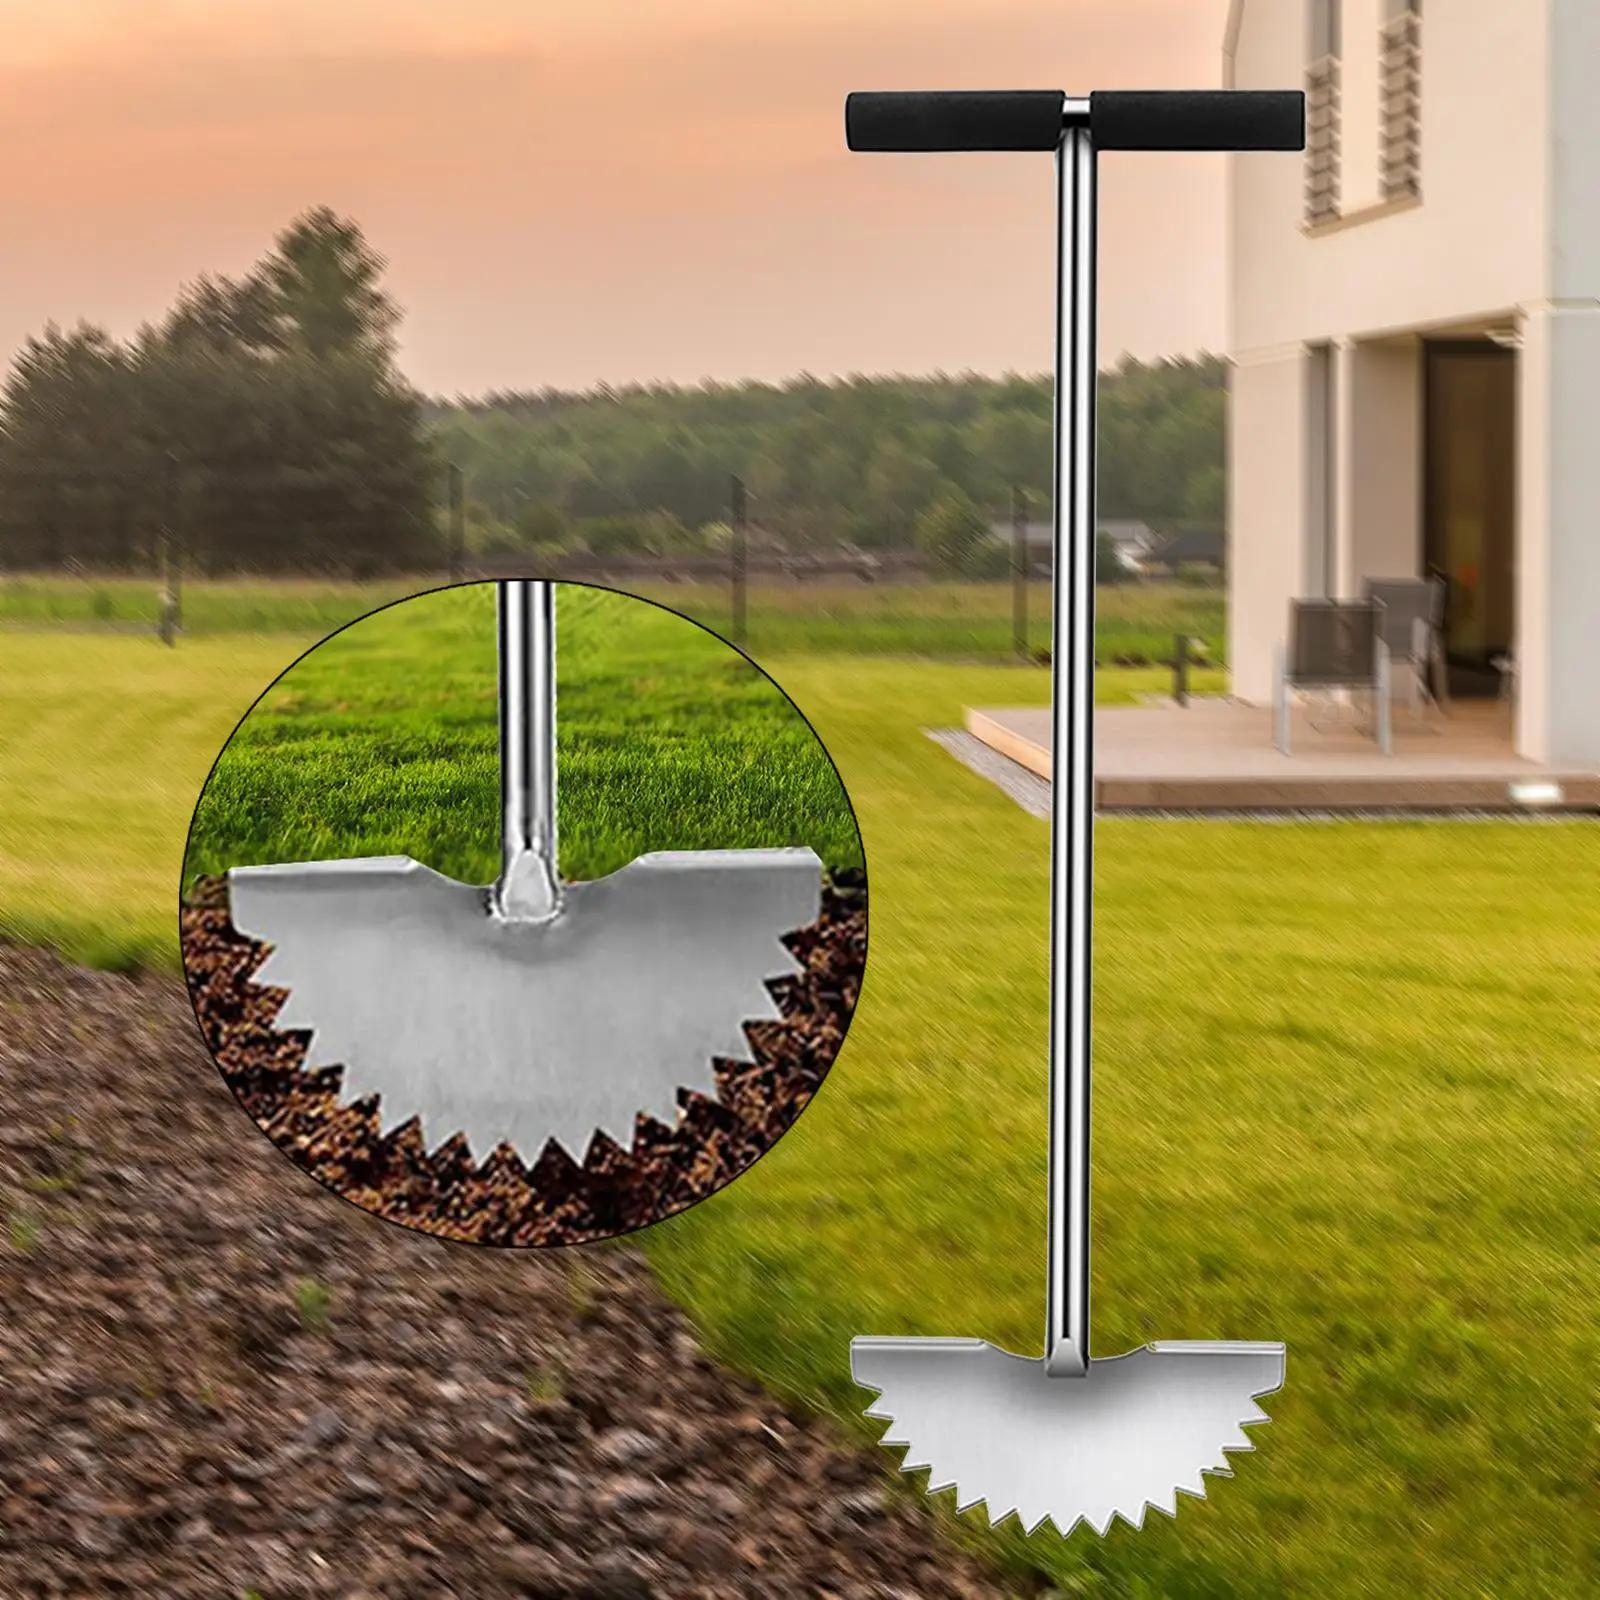 Lawn Edger Tool Stainless Steel with Handle Half Moon Edger Manual Edger for Cleaning Edges Garden Driveways Sidewalks Patio